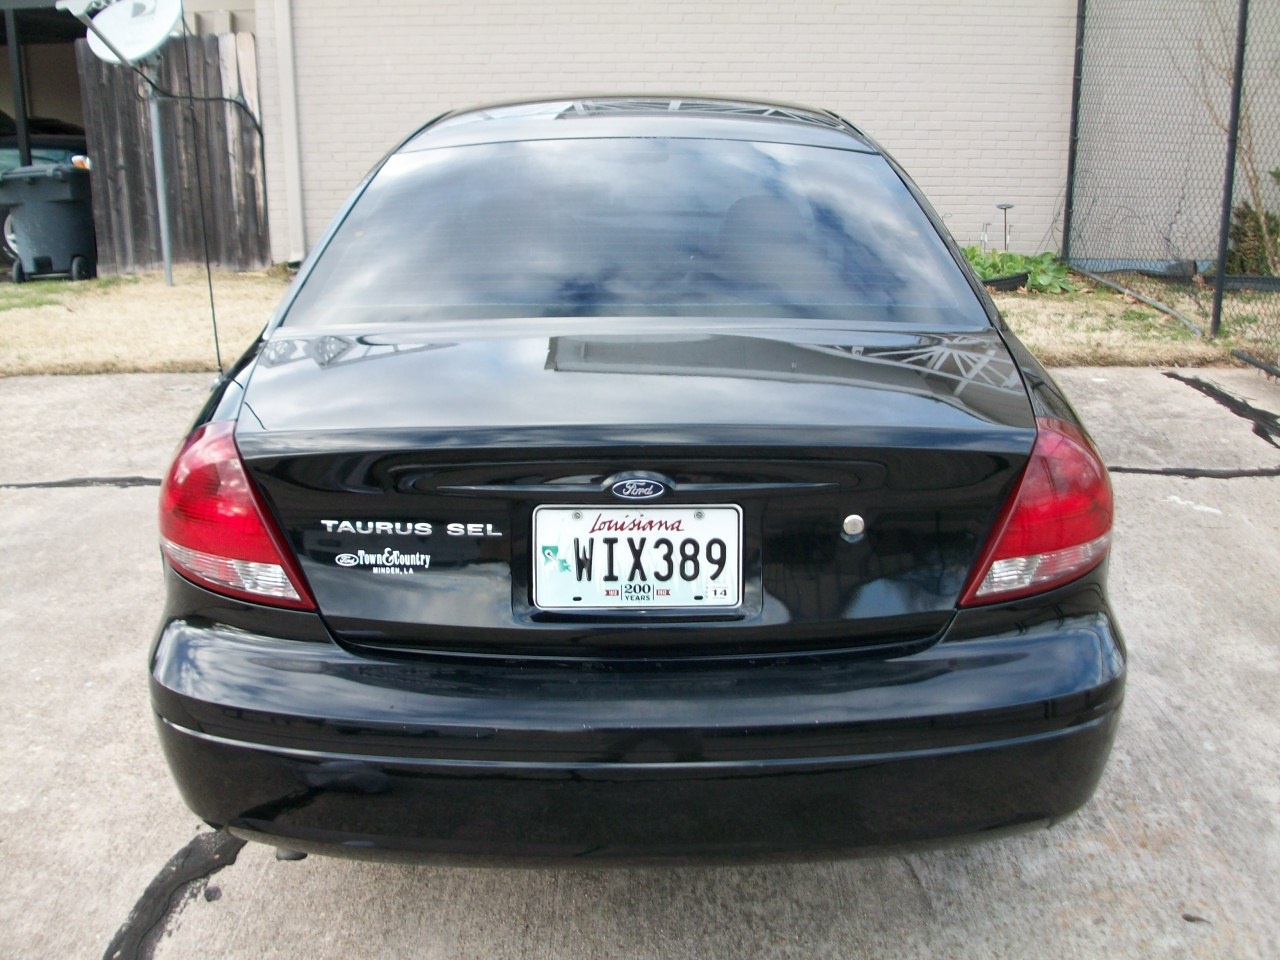 2007 Ford taurus sel review #8